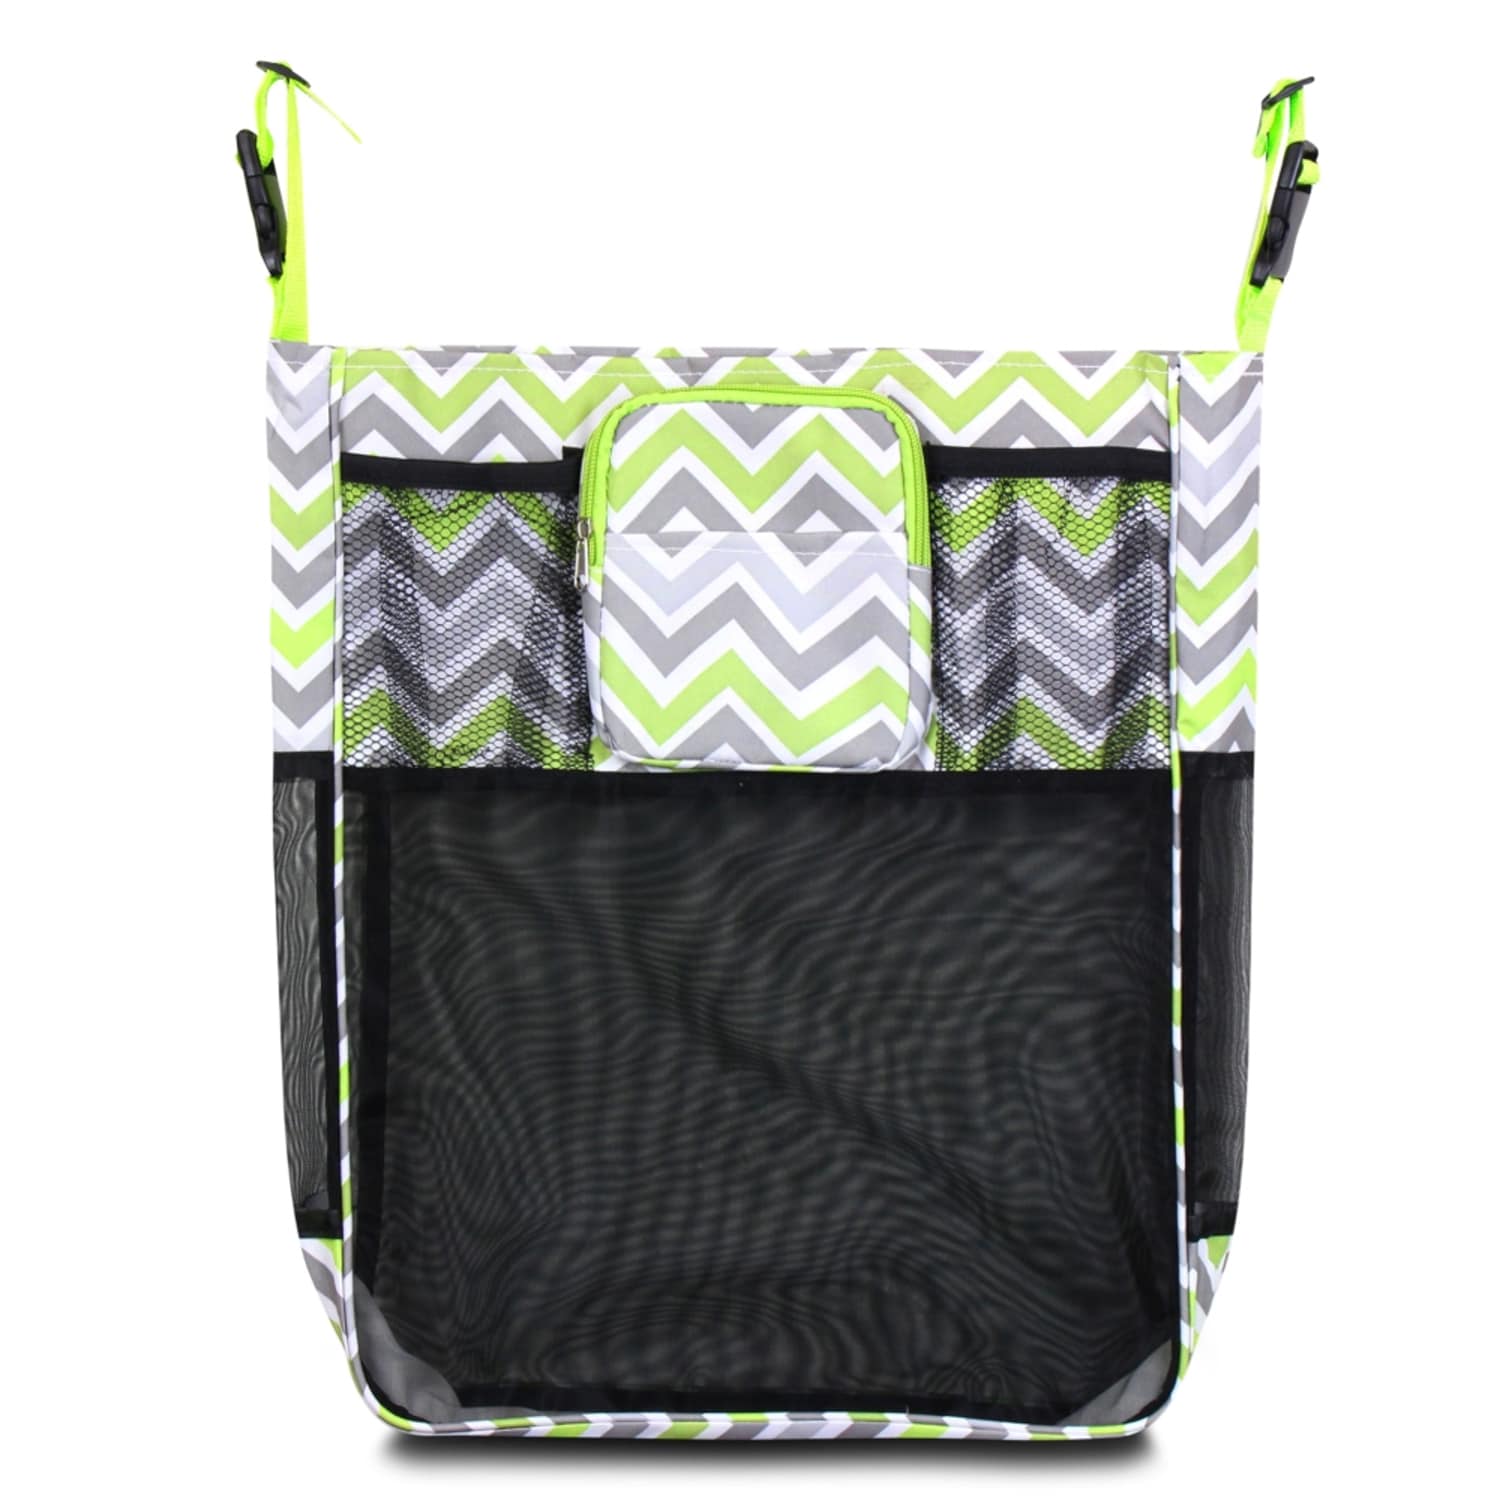 stroller cover for storage